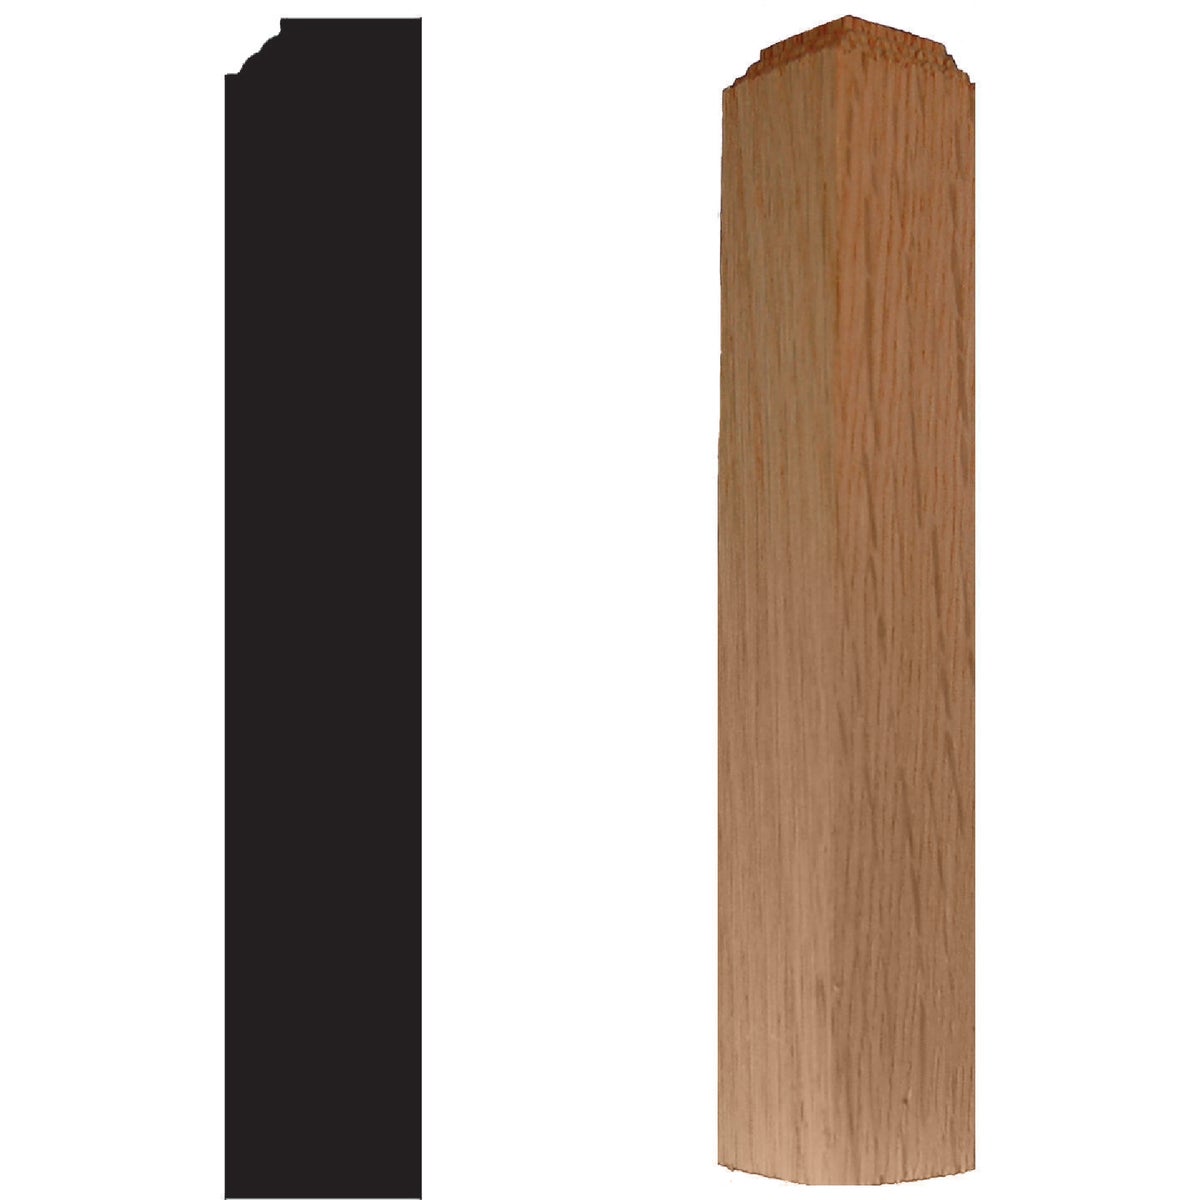 Item 190160, Designed for use with all standard wood moldings presently stocked by all 